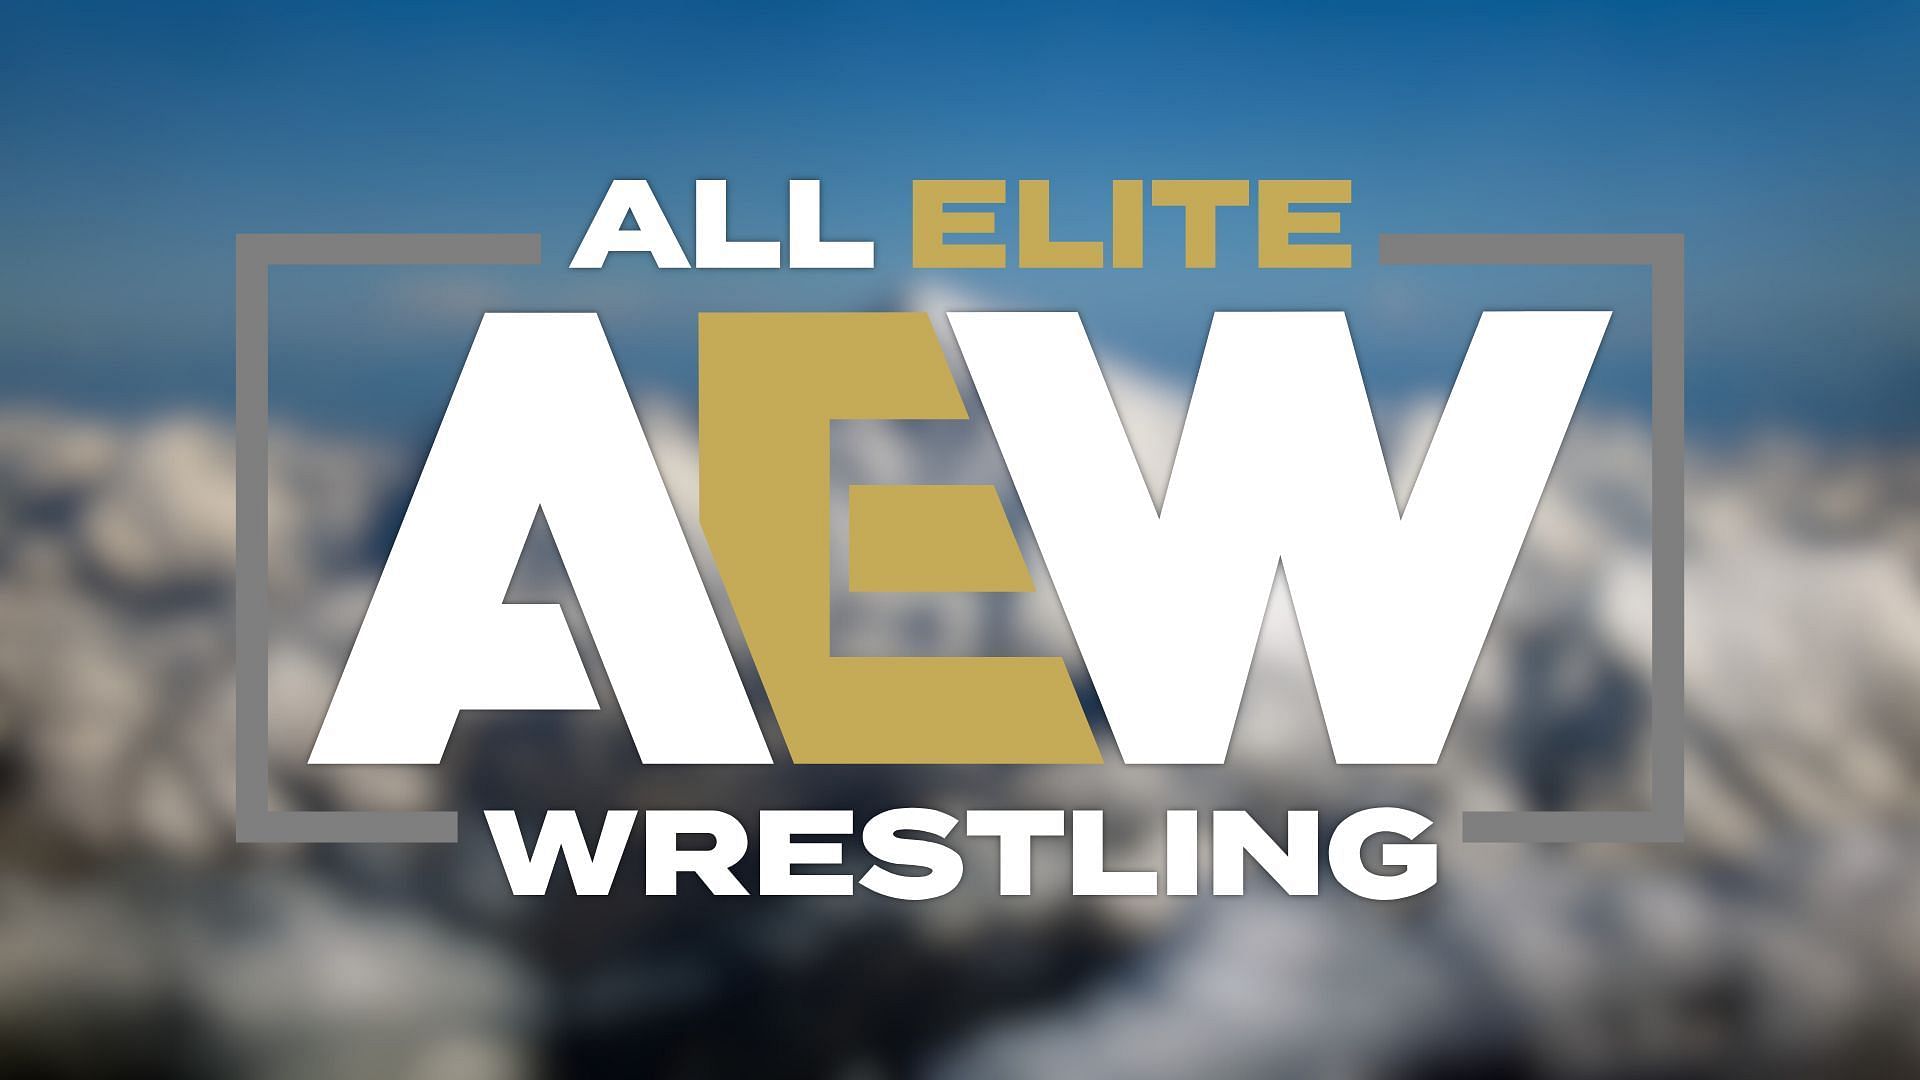 Which AEW star will draft their will in case they die on Mount Everest?